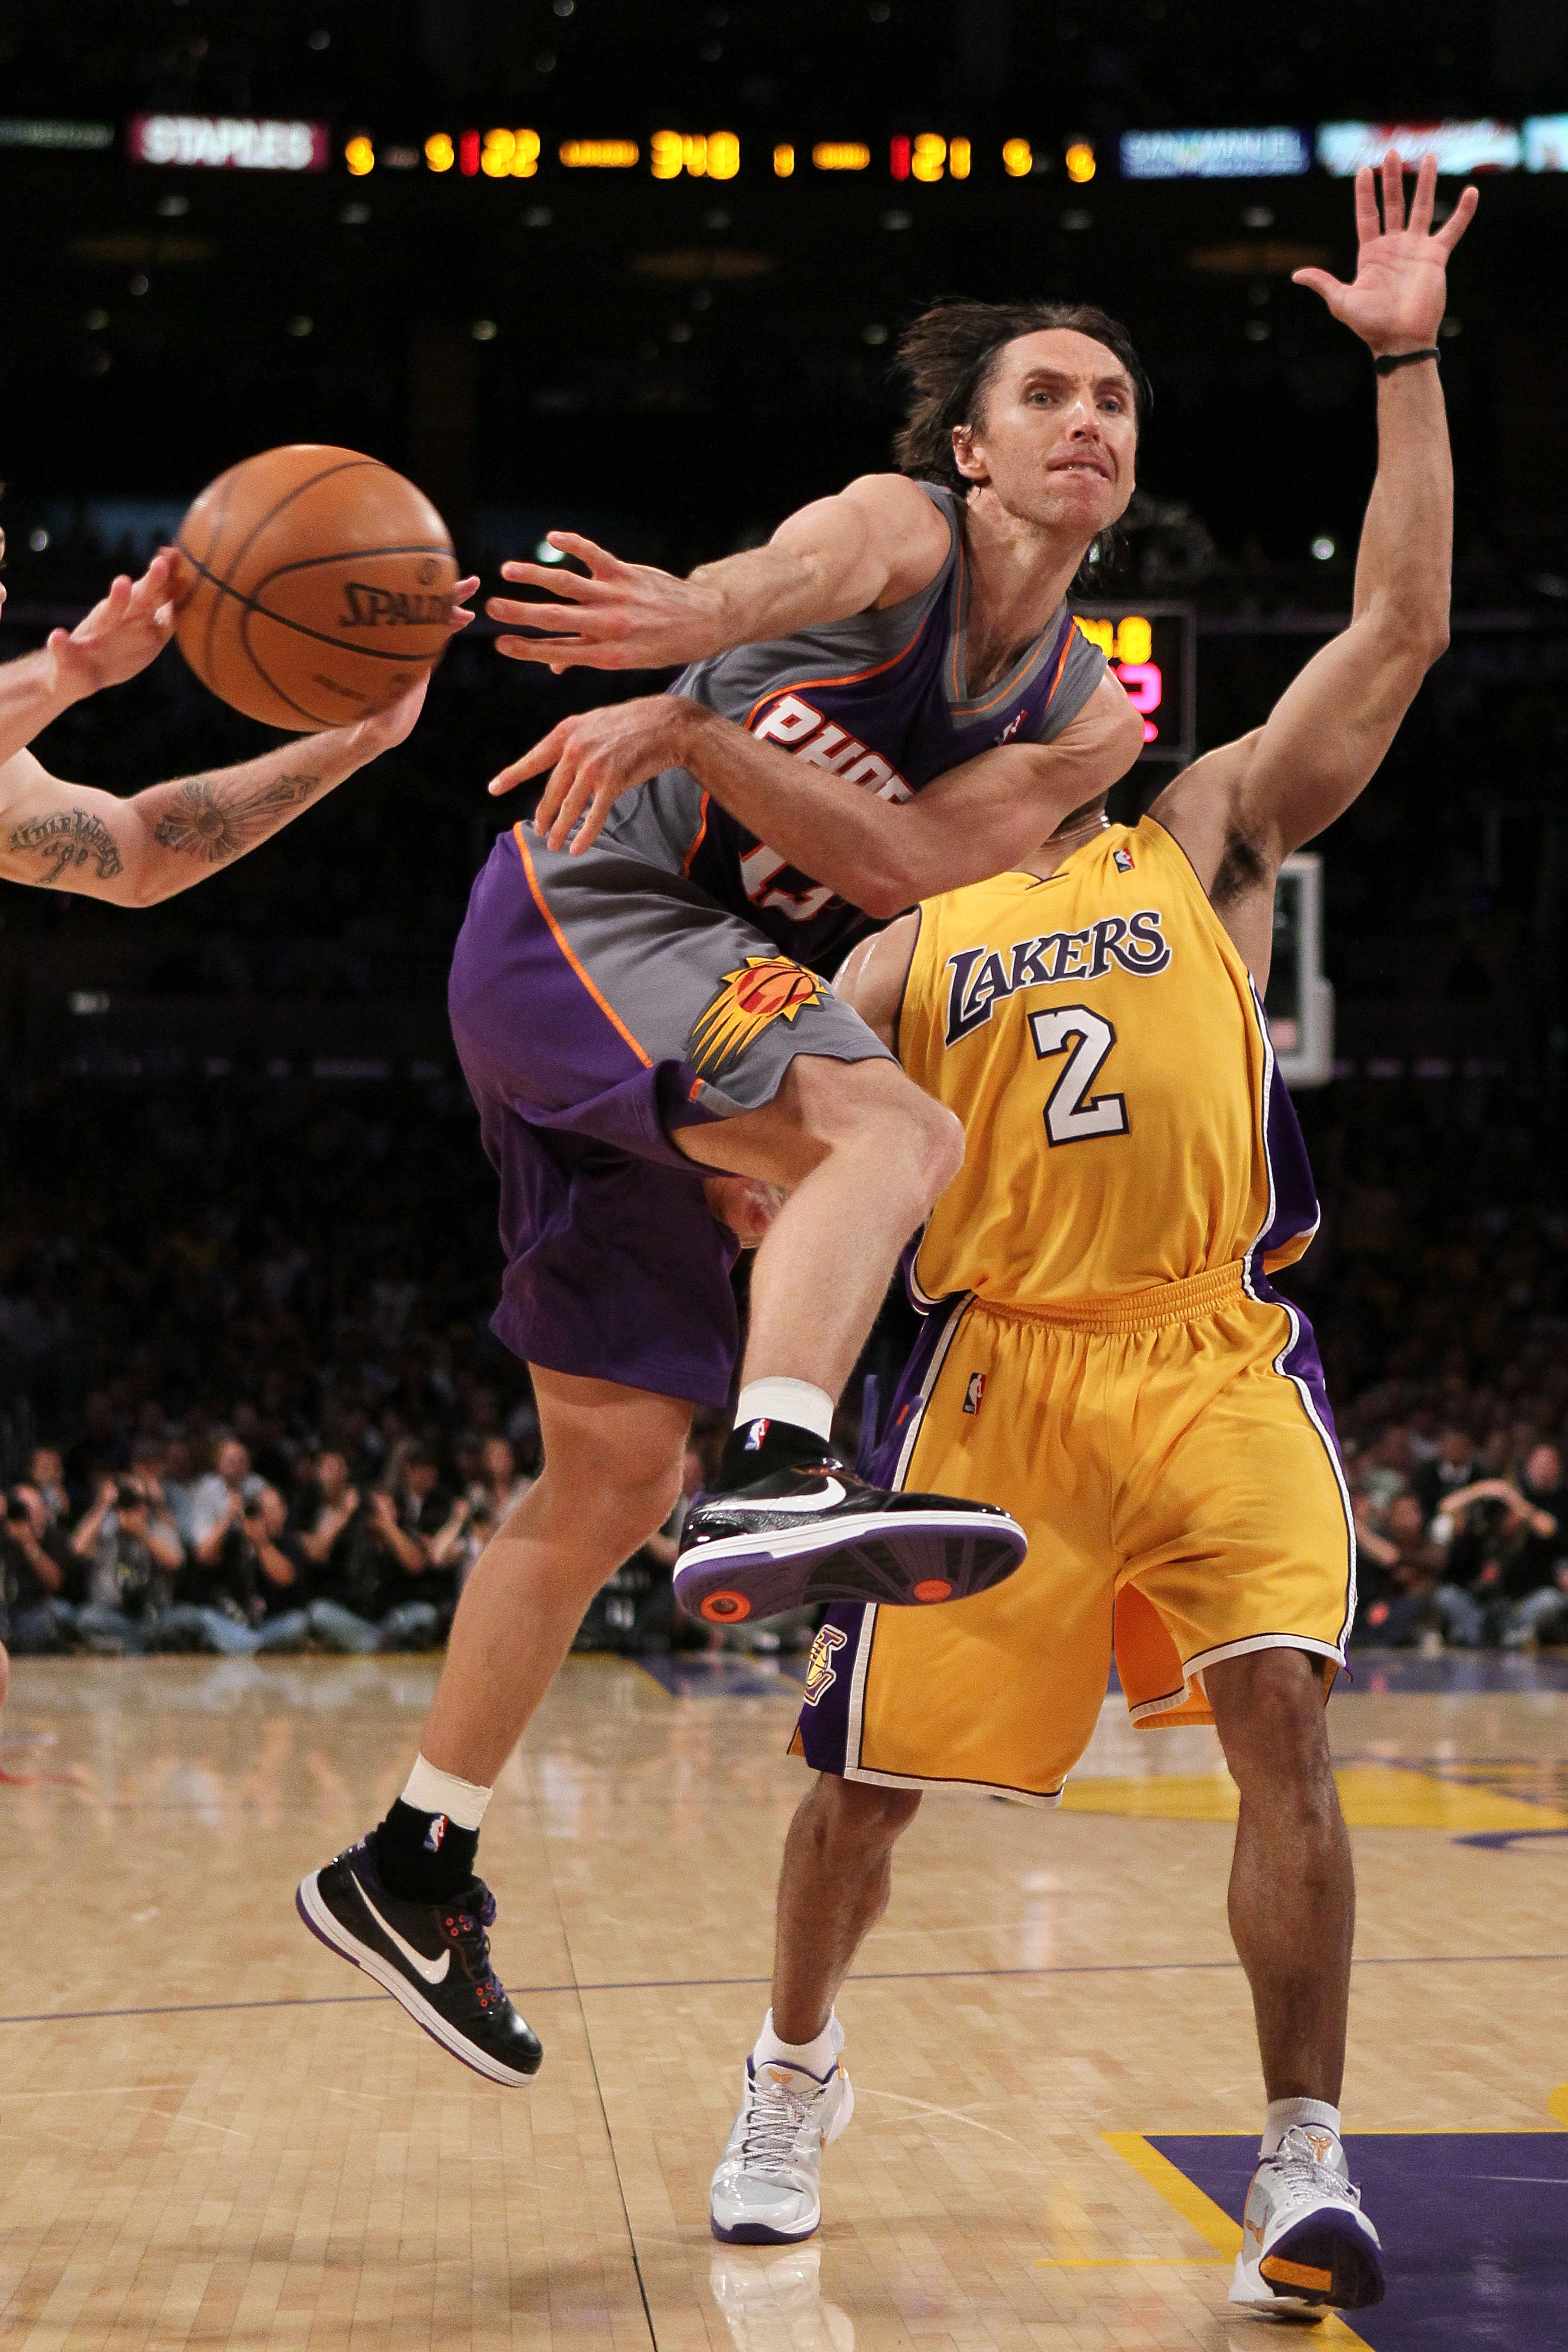 Steve Nash and Amare Stoudamire back in the day. : r/suns